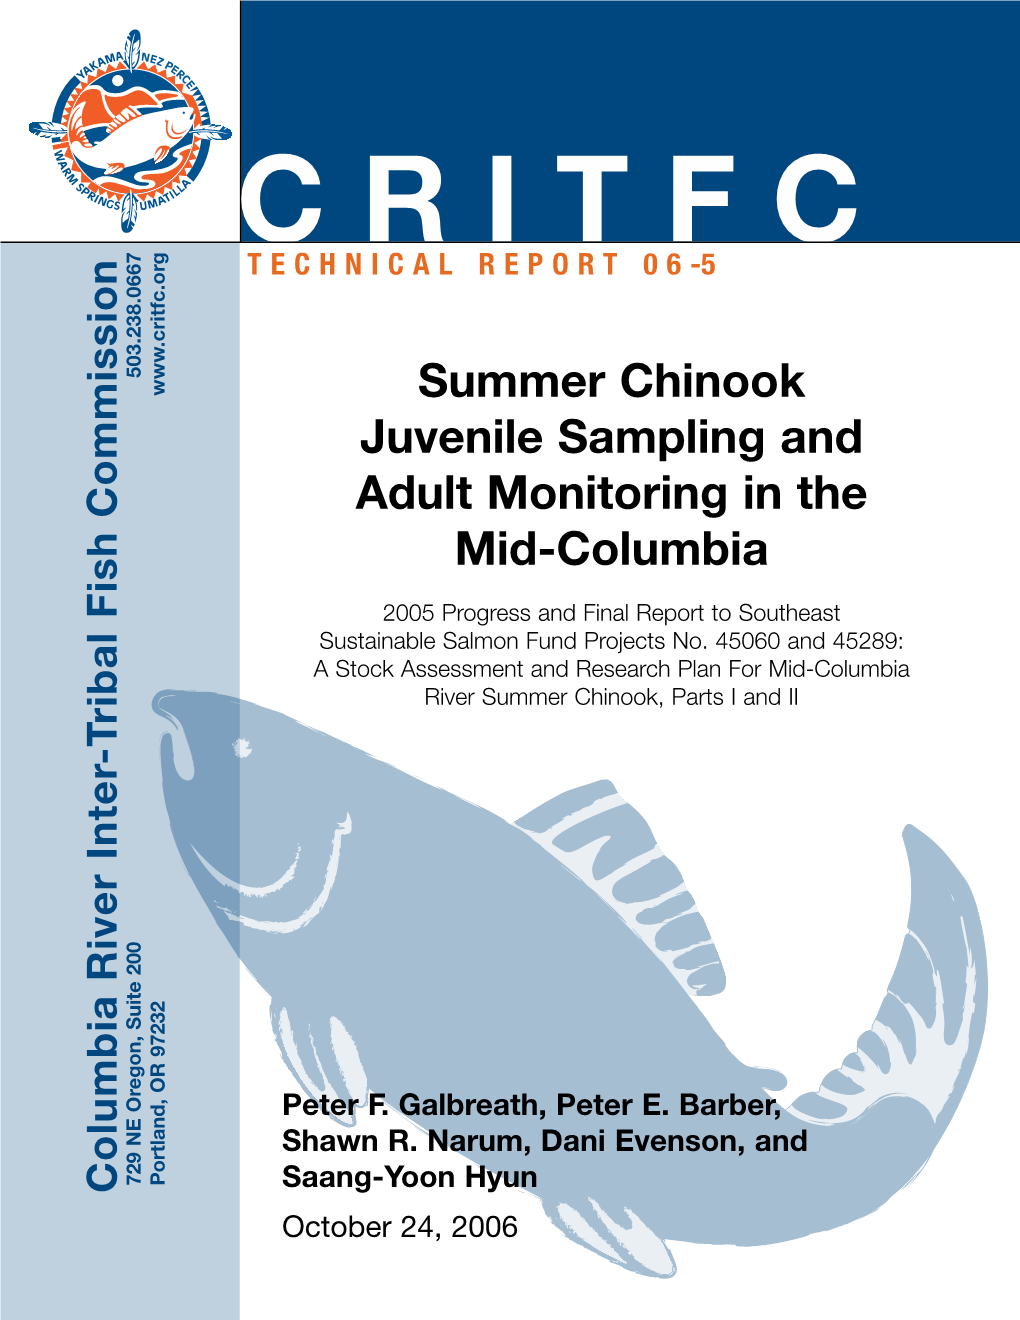 Summer Chinook Juvenile Sampling and Adult Monitoring in the Mid-Columbia